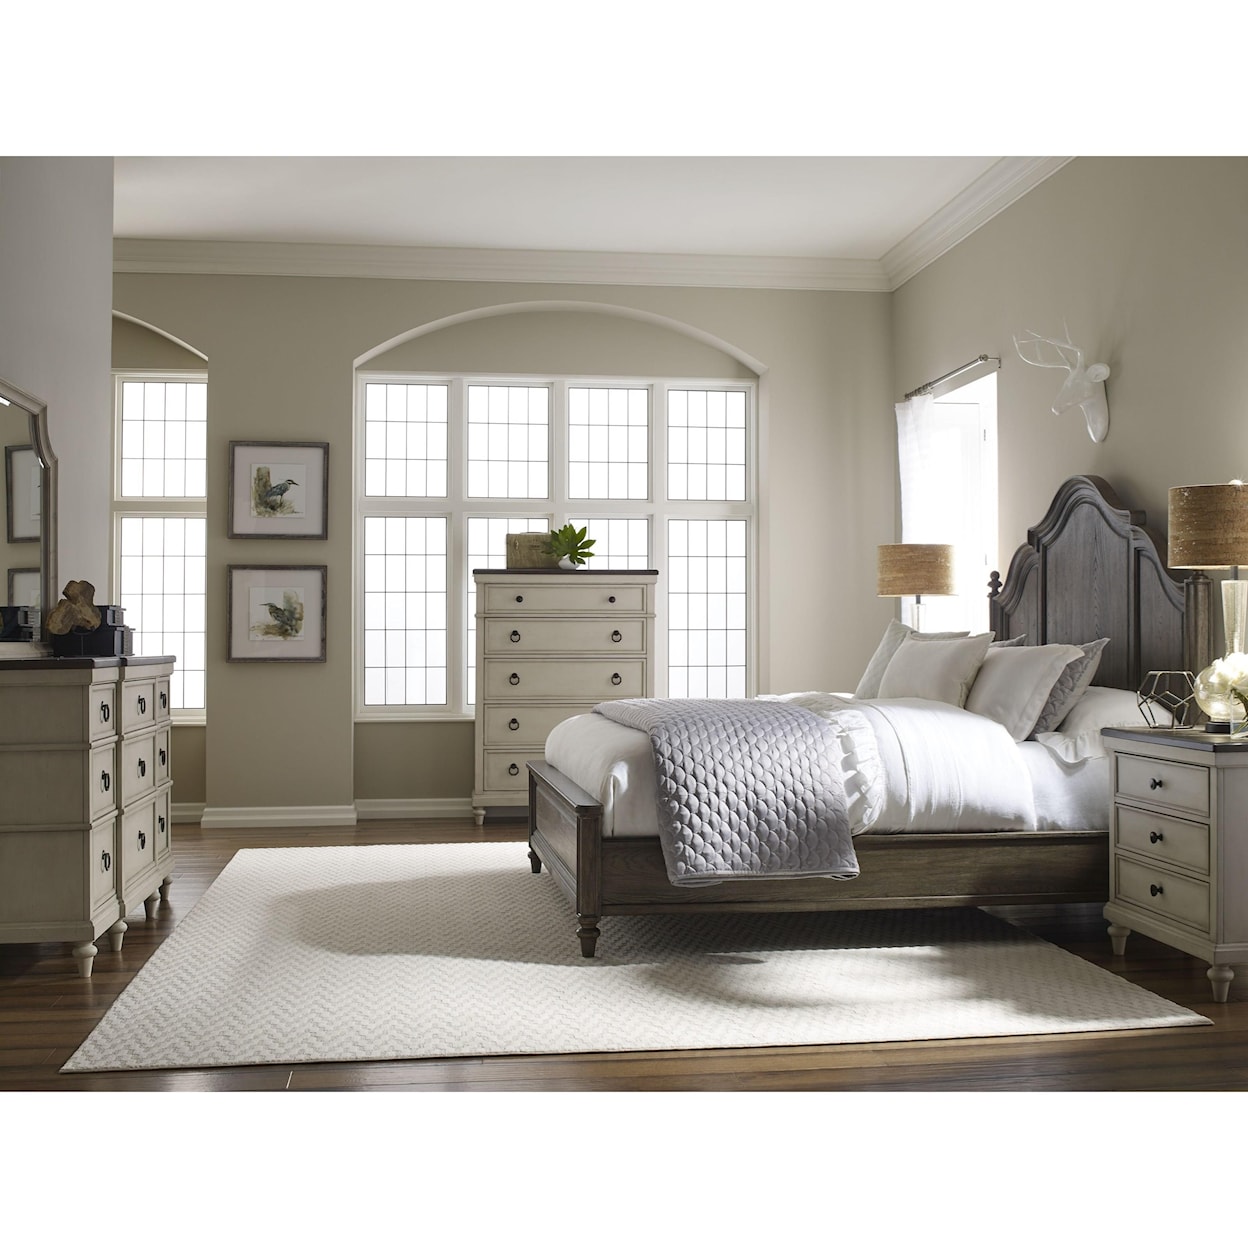 Legacy Classic Brookhaven Drawer Chest